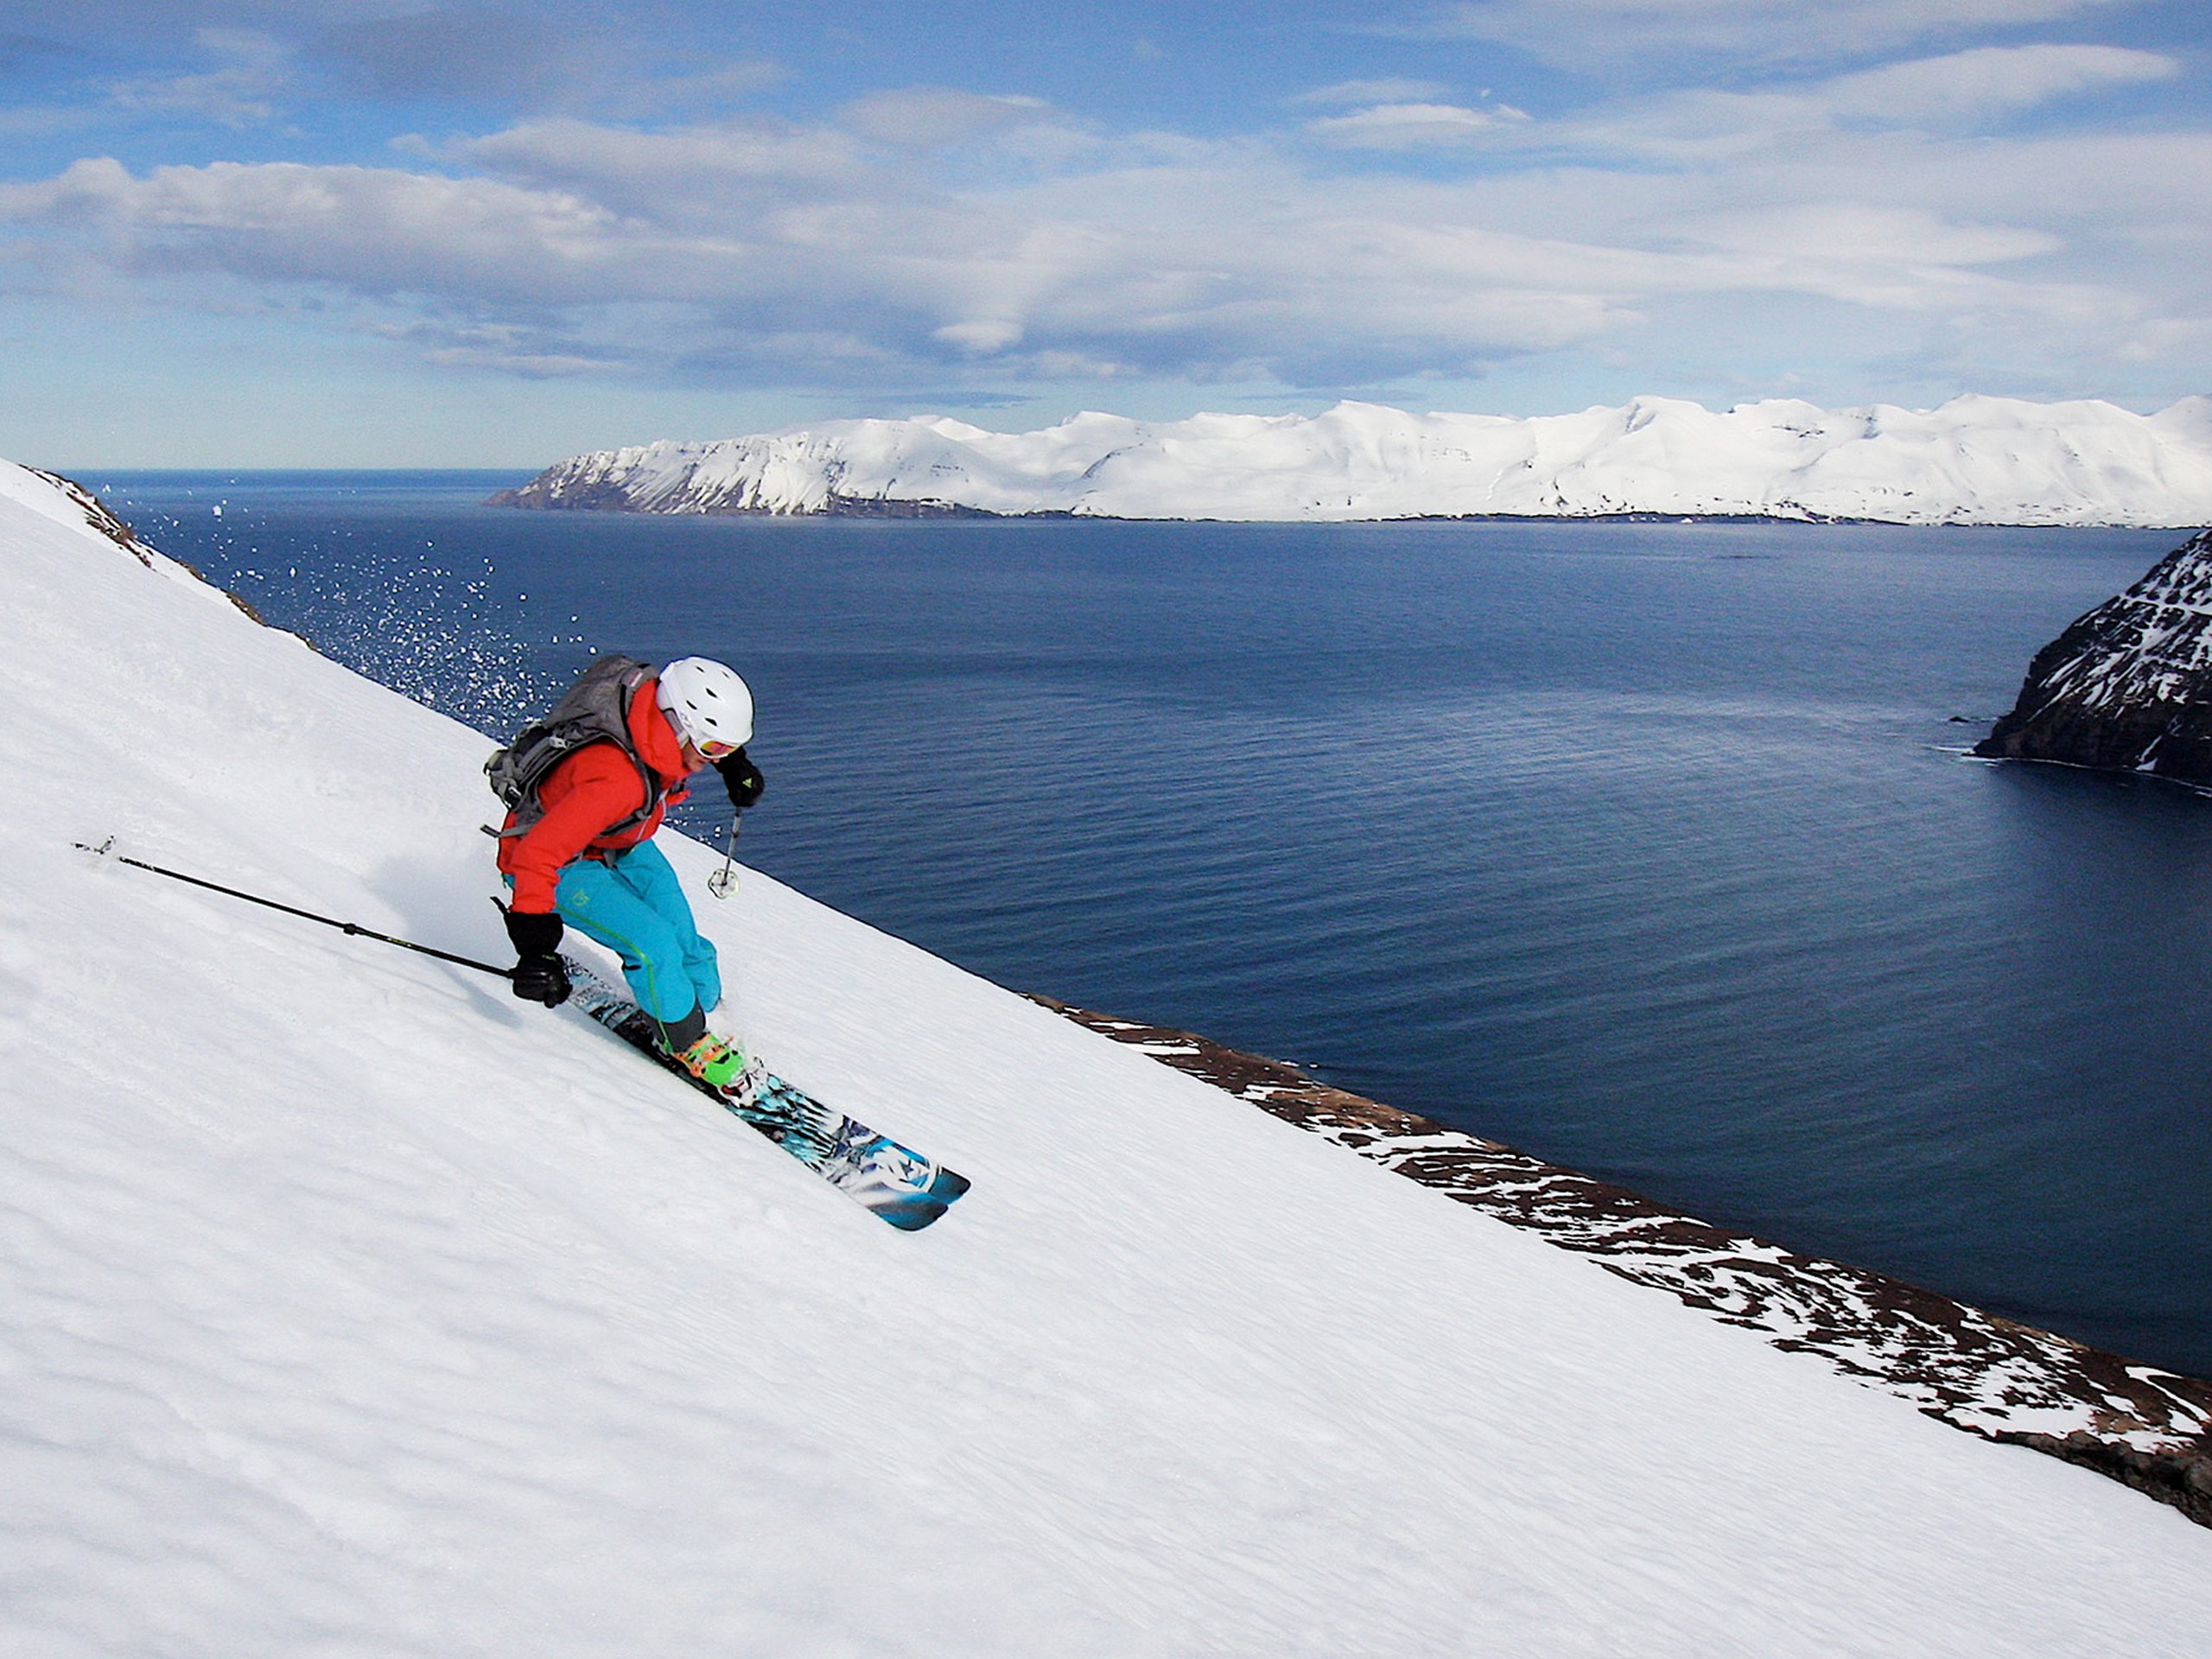 Ski Touring in South Iceland - Photo by Guenter Kast